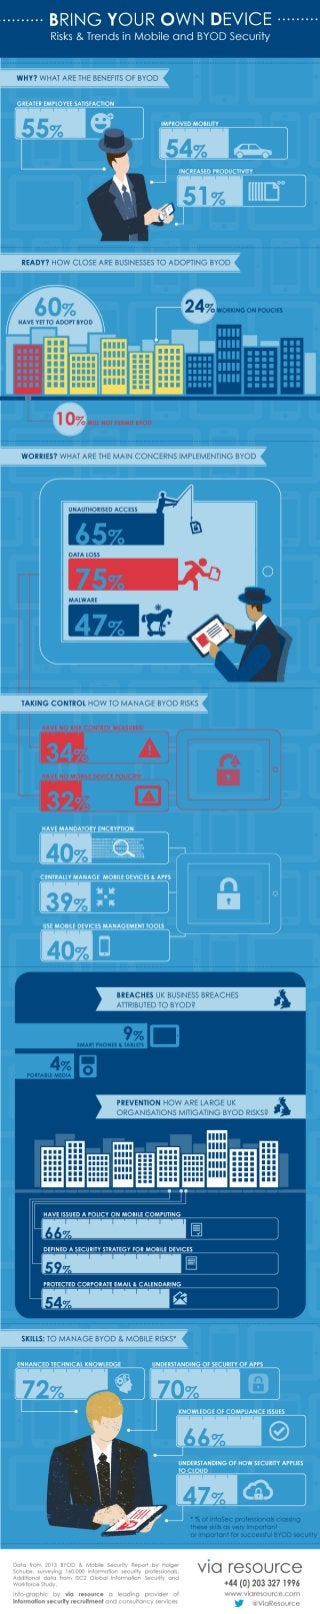 Infographic: Byod - Risks, Trends & Skills For Byod Security